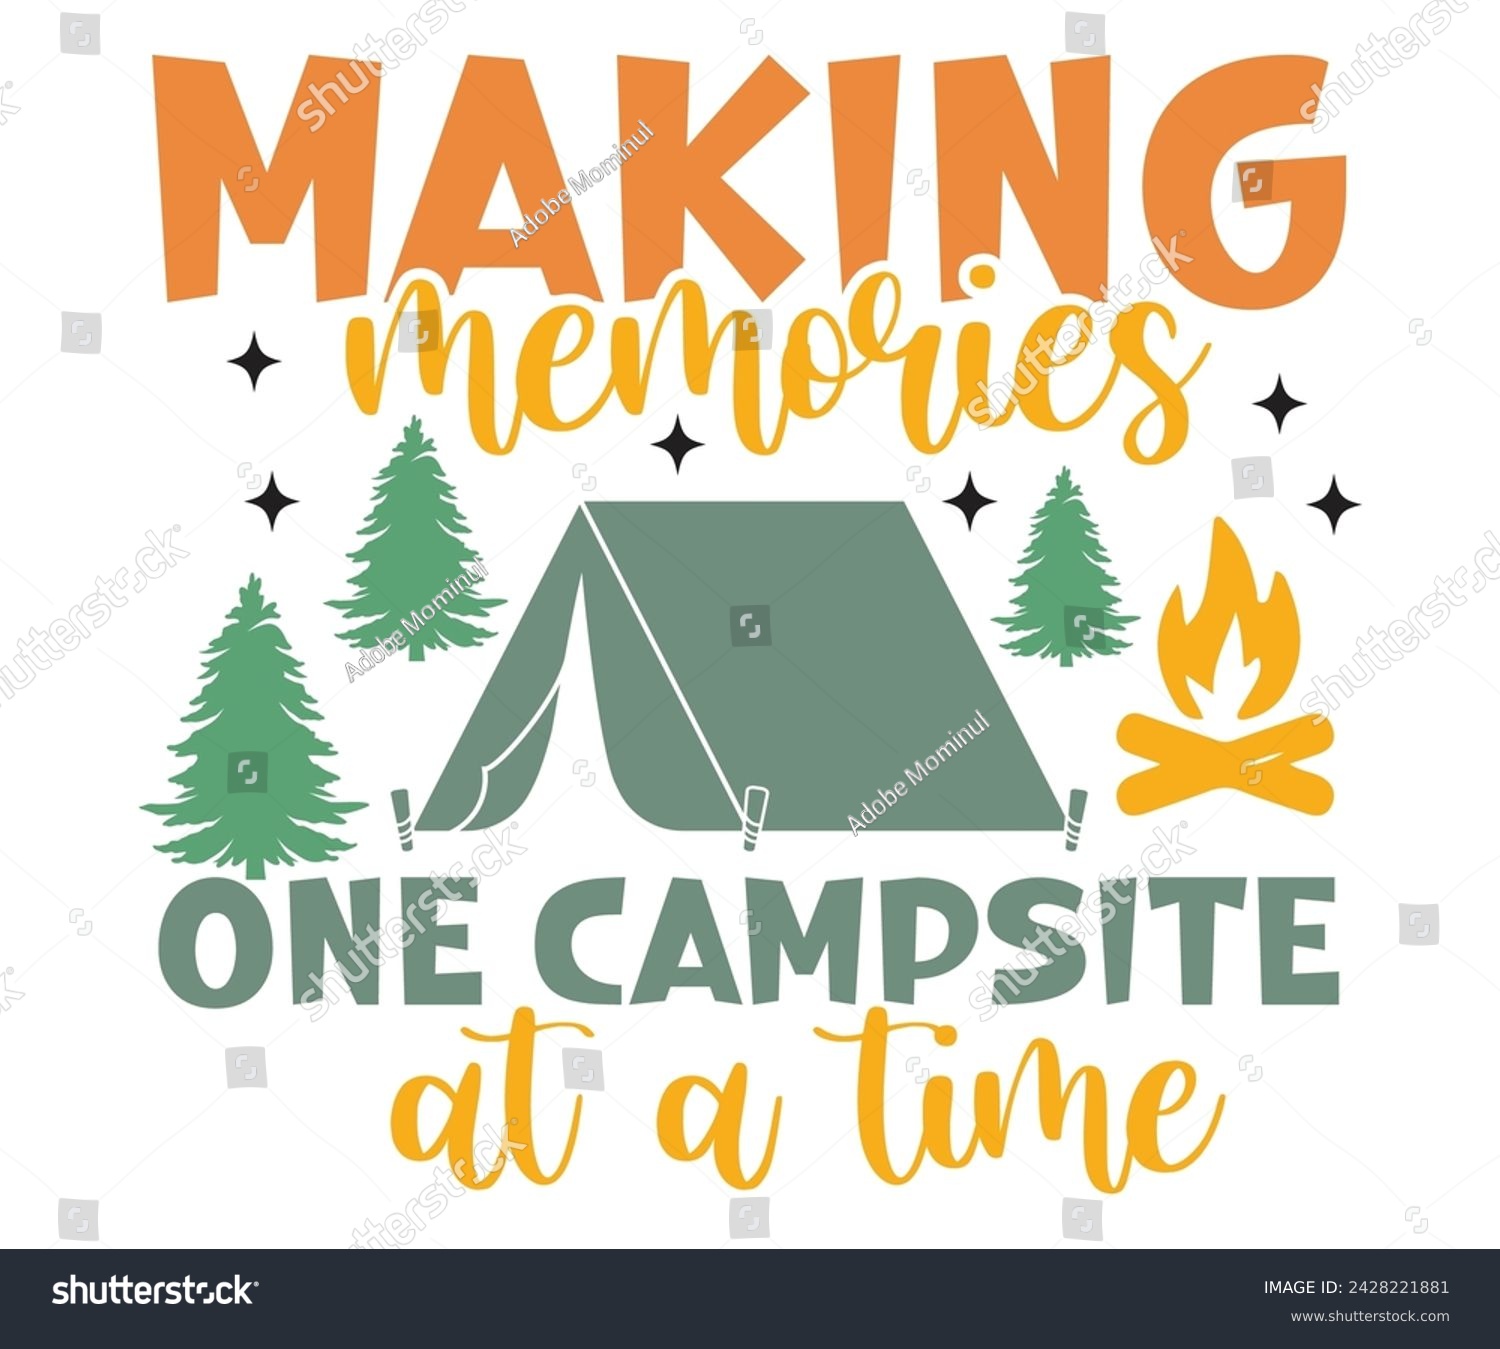 SVG of Making Memories One Campsite At A Time Svg,Happy Camper Svg,Camping Svg,Adventure Svg,Hiking Svg,Camp Saying,Camp Life Svg,Svg Cut Files, Png,Mountain T-shirt,Instant Download svg